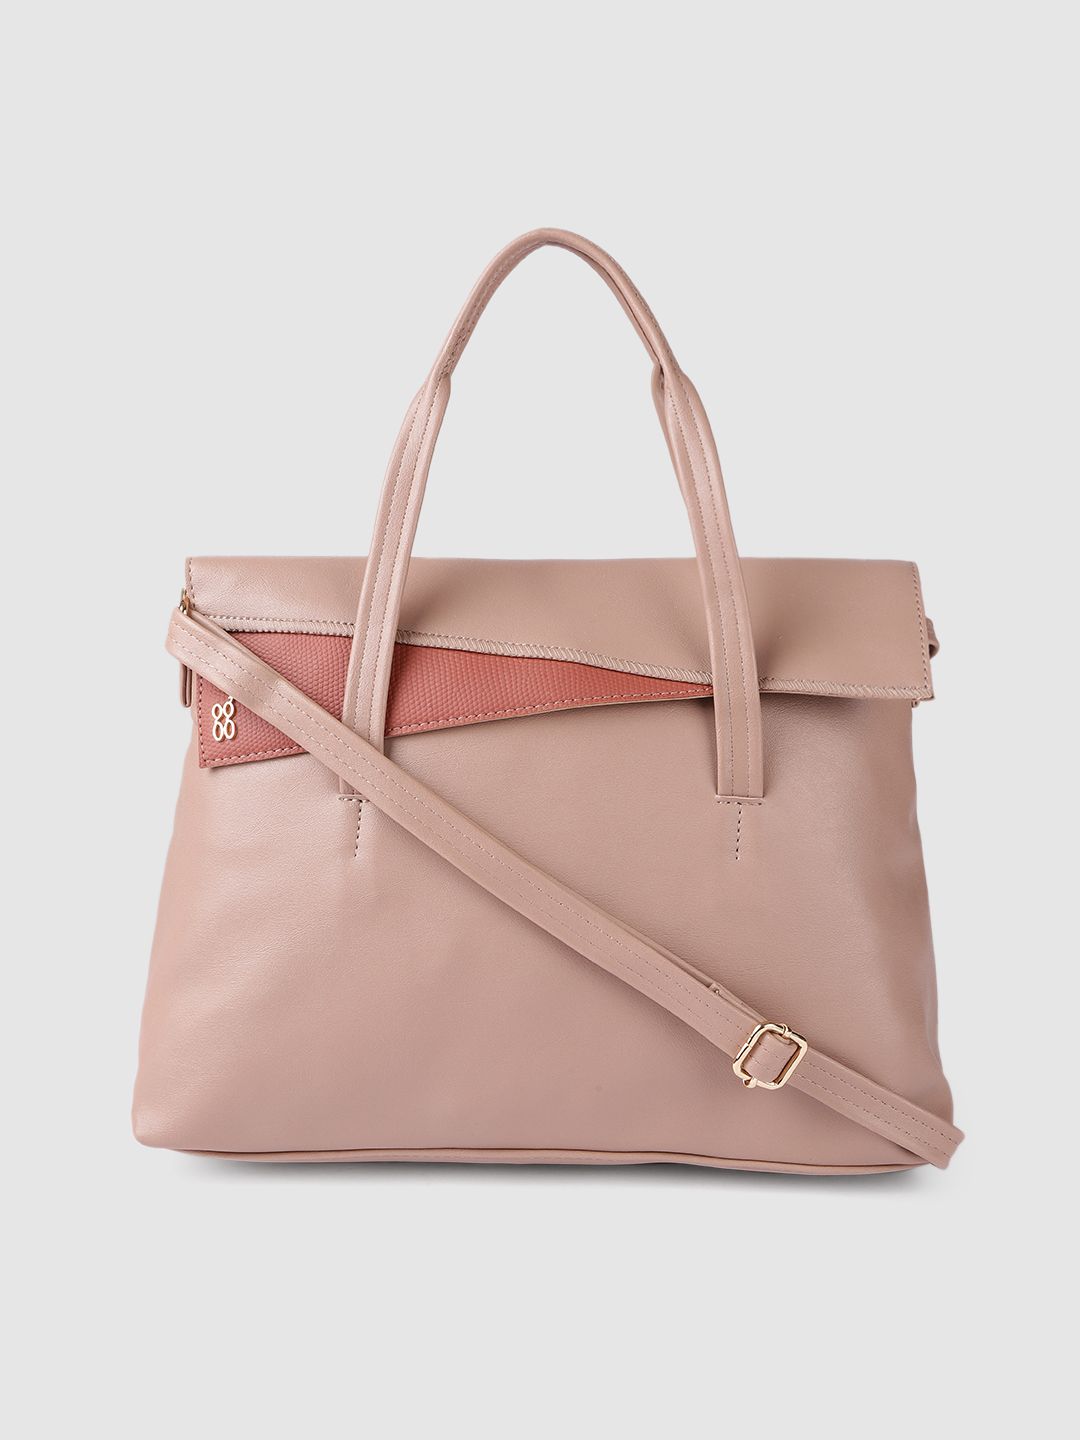 Baggit Pink Solid Structured Handheld Bag Price in India